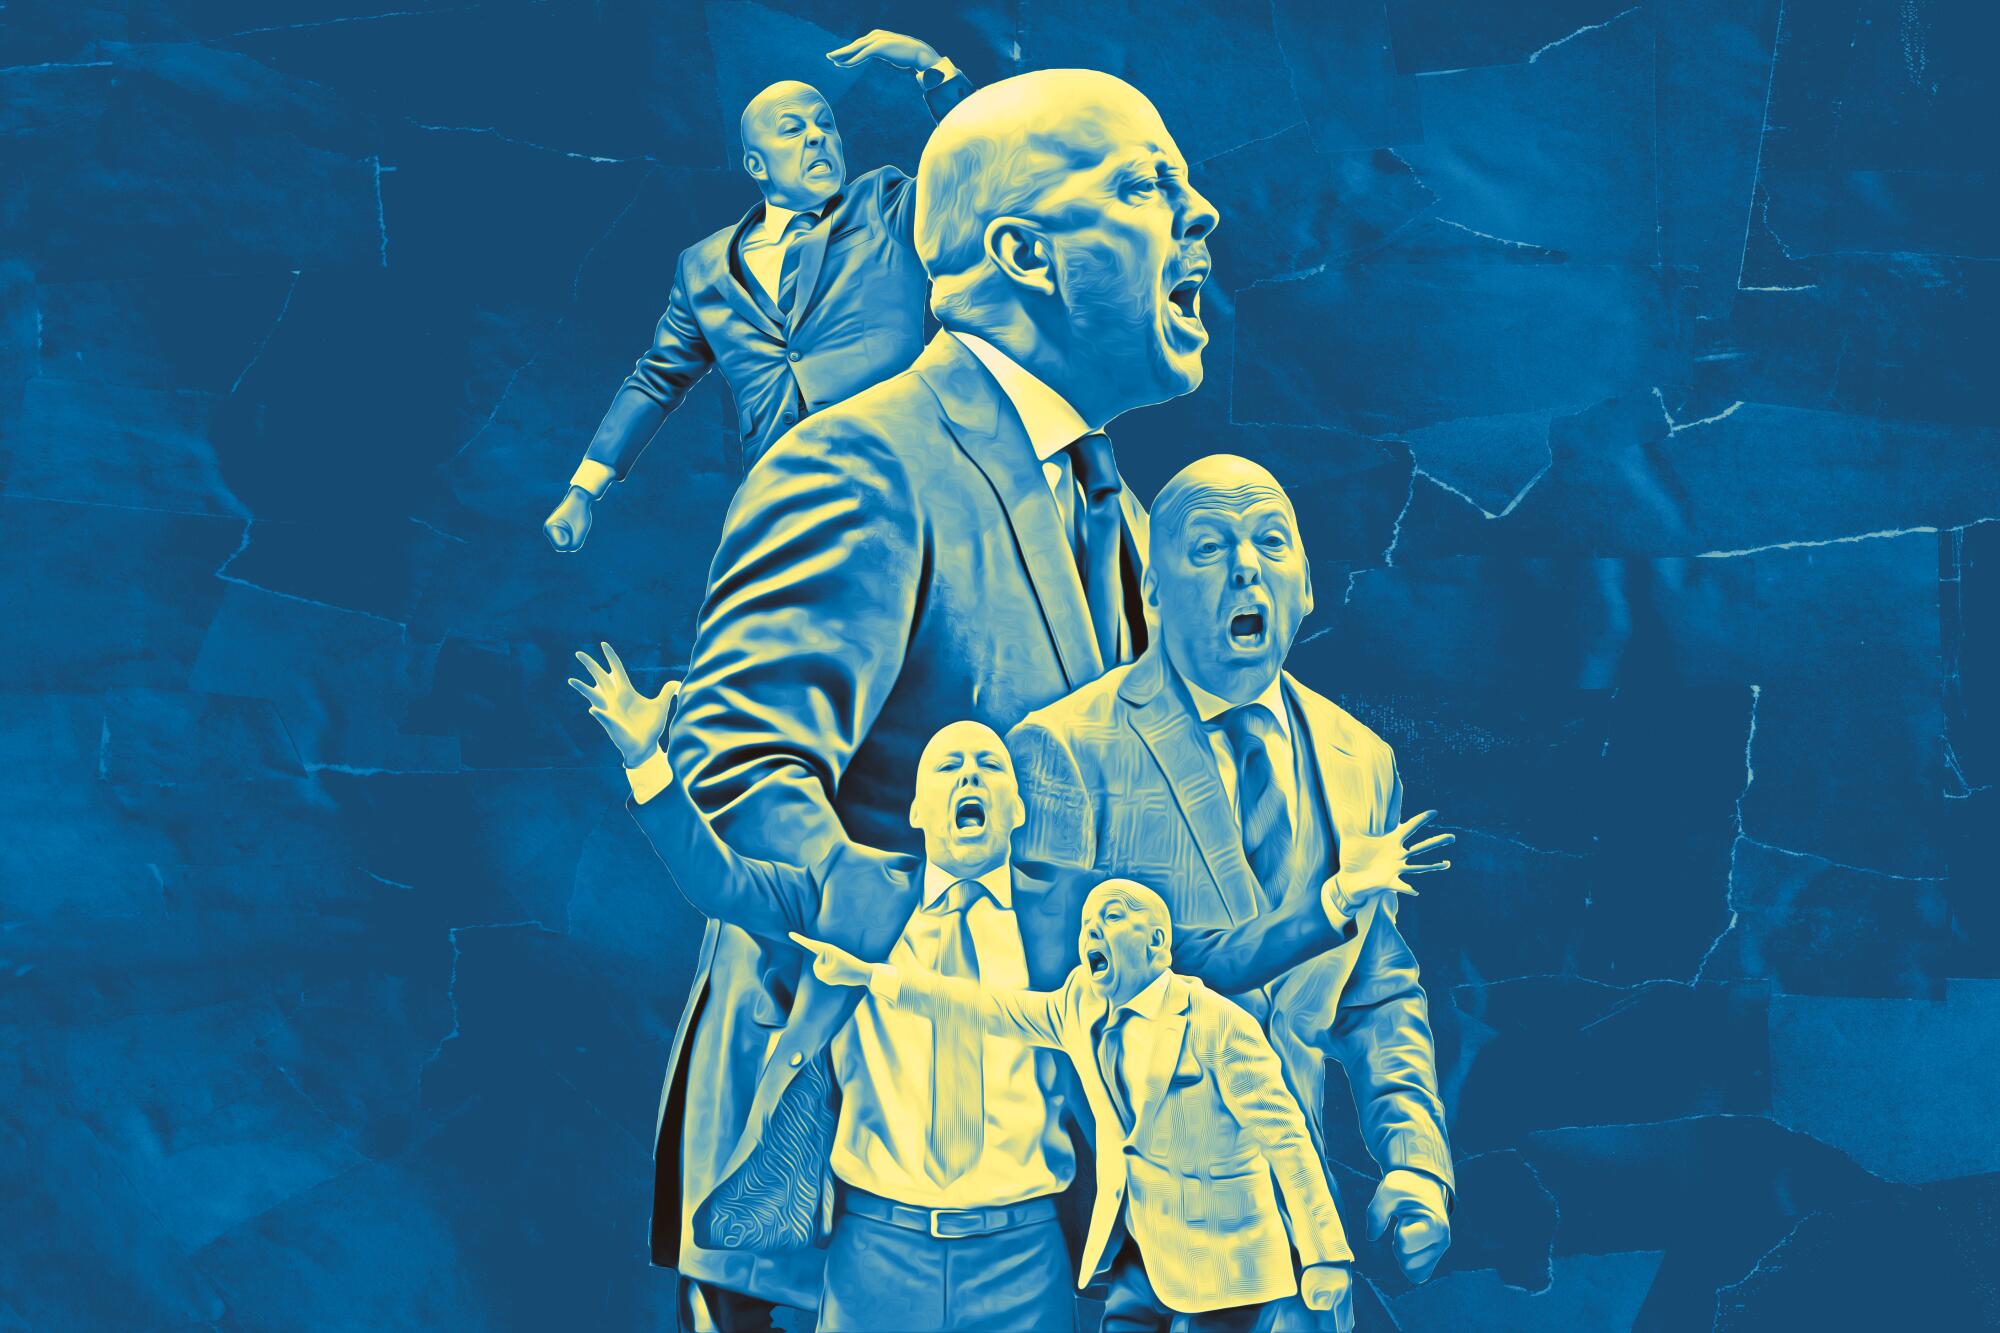 A series of photos of UCLA coach Mick Cronin shouting and reacting from the sidelines to his players' actions and referees.